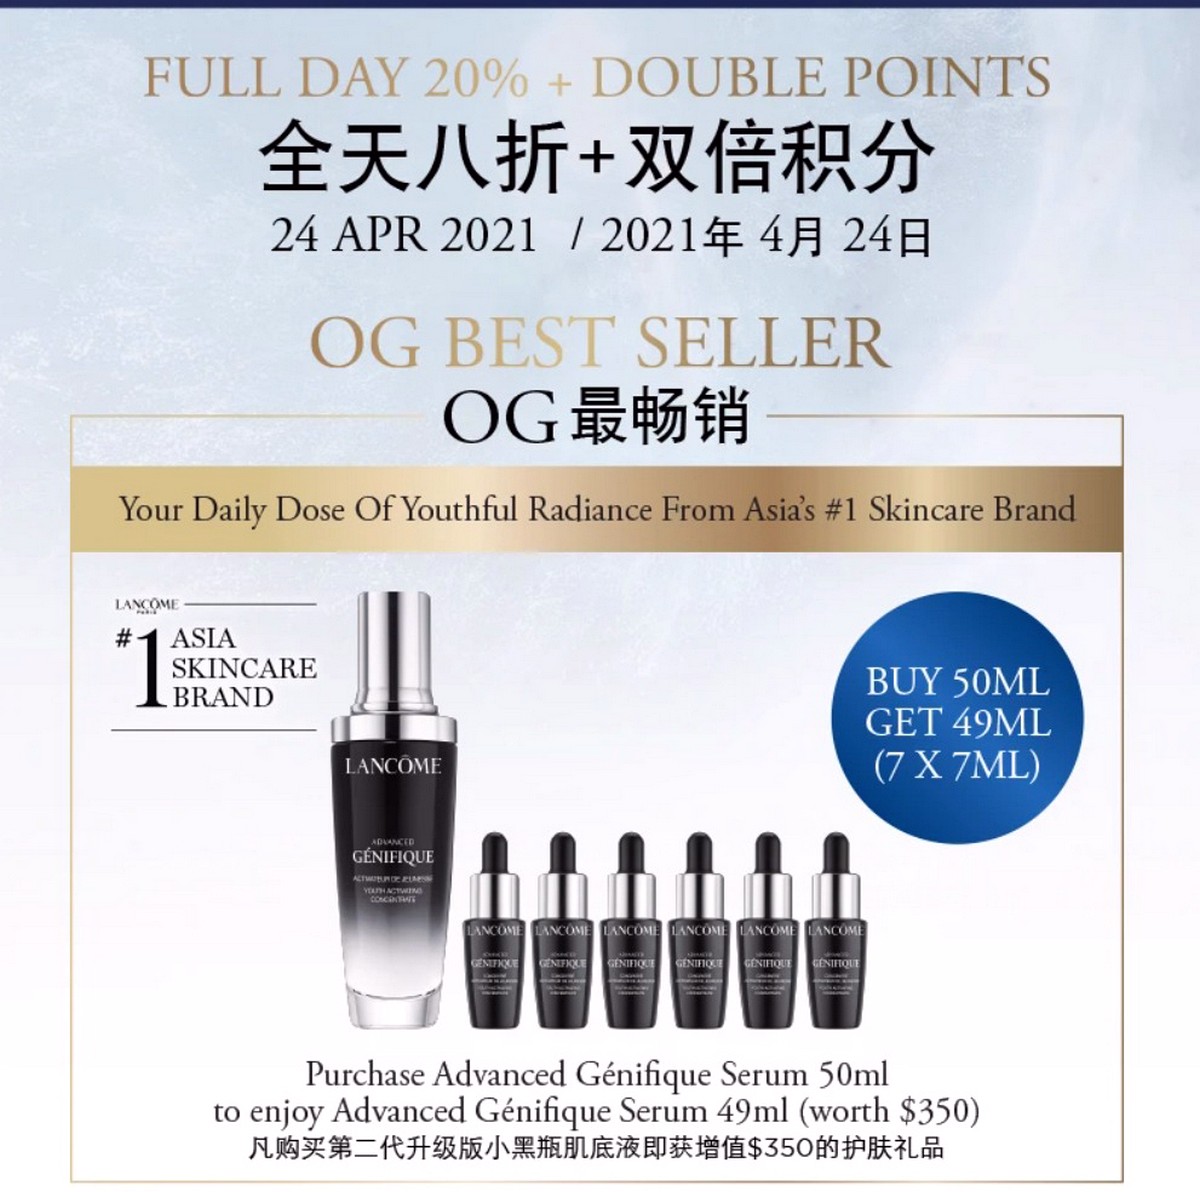 Lancome-02 20 Apr-9 May 2021: Lancôme at OG People’s Park Exclusive One-time Offer Promotion! Buy 50ml get 49ml (Saving of $172)